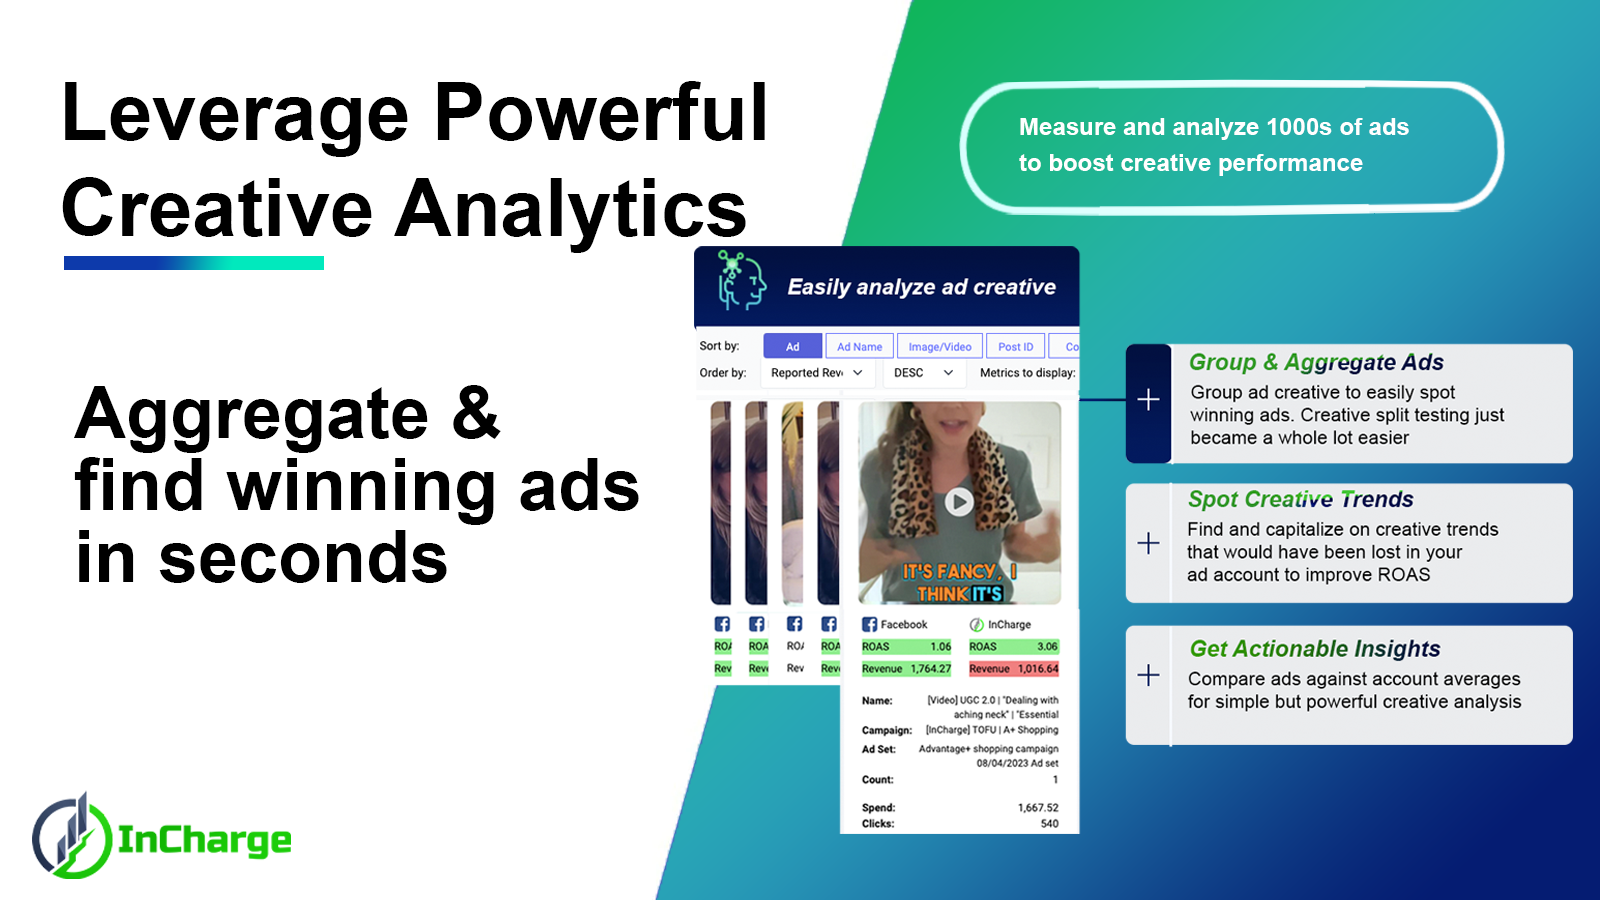 Creative Analytics | Measure 1000s of ads in seconds